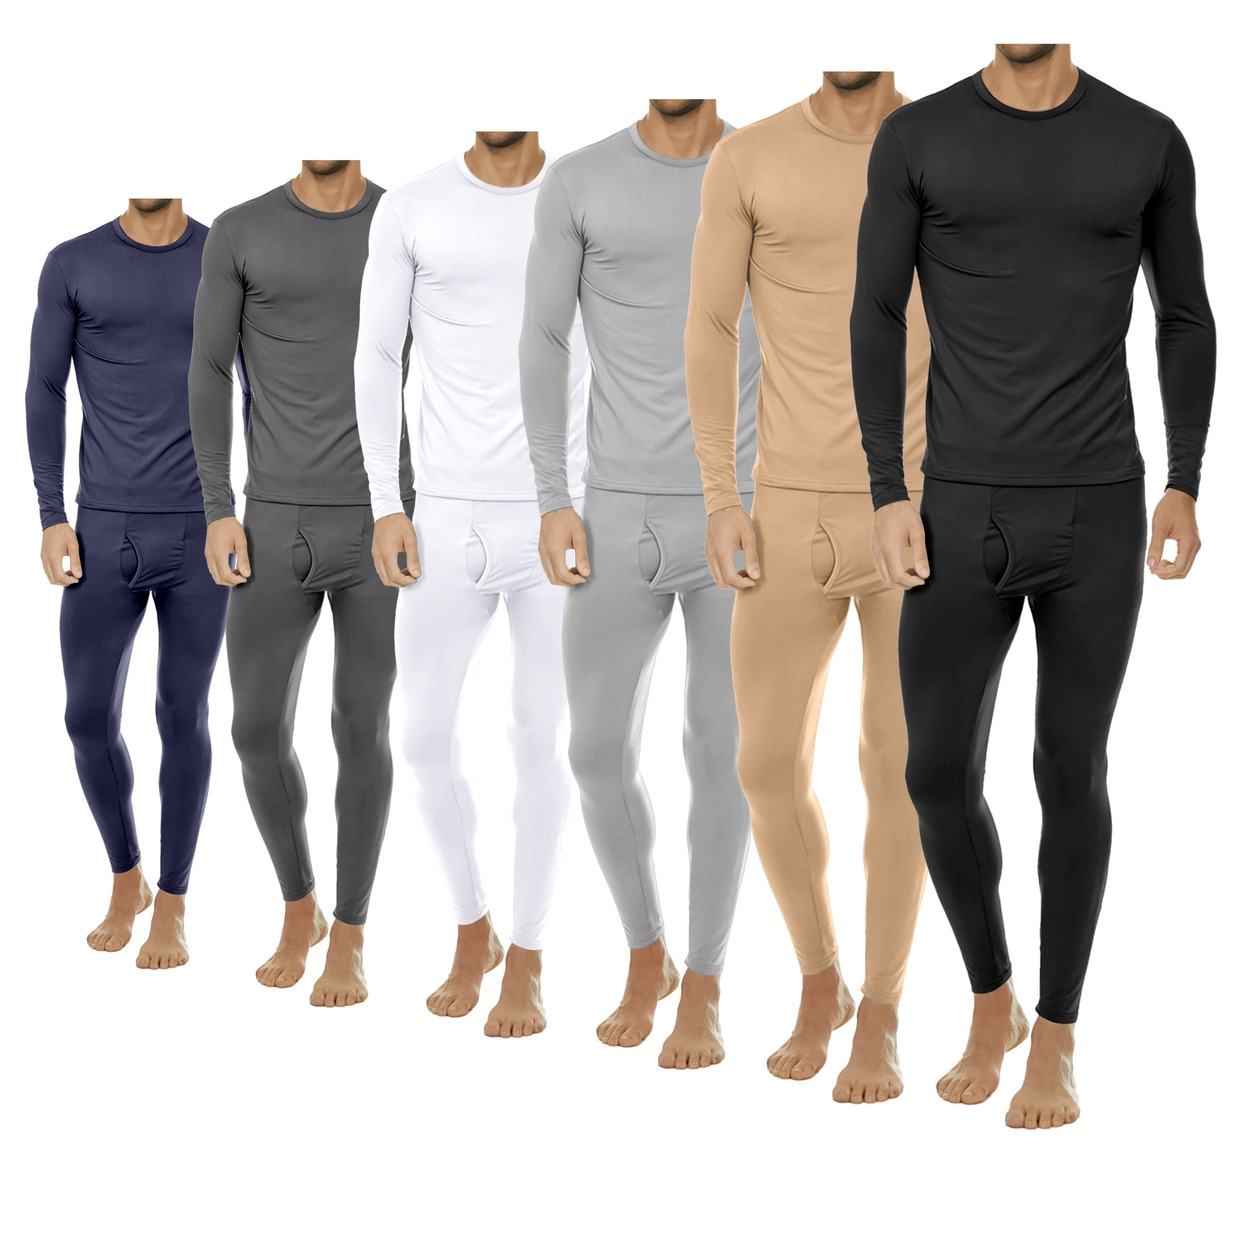 2-Pieces: Men's Winter Warm Fleece Lined Thermal Underwear Set For Cold Weather - Grey, X-large